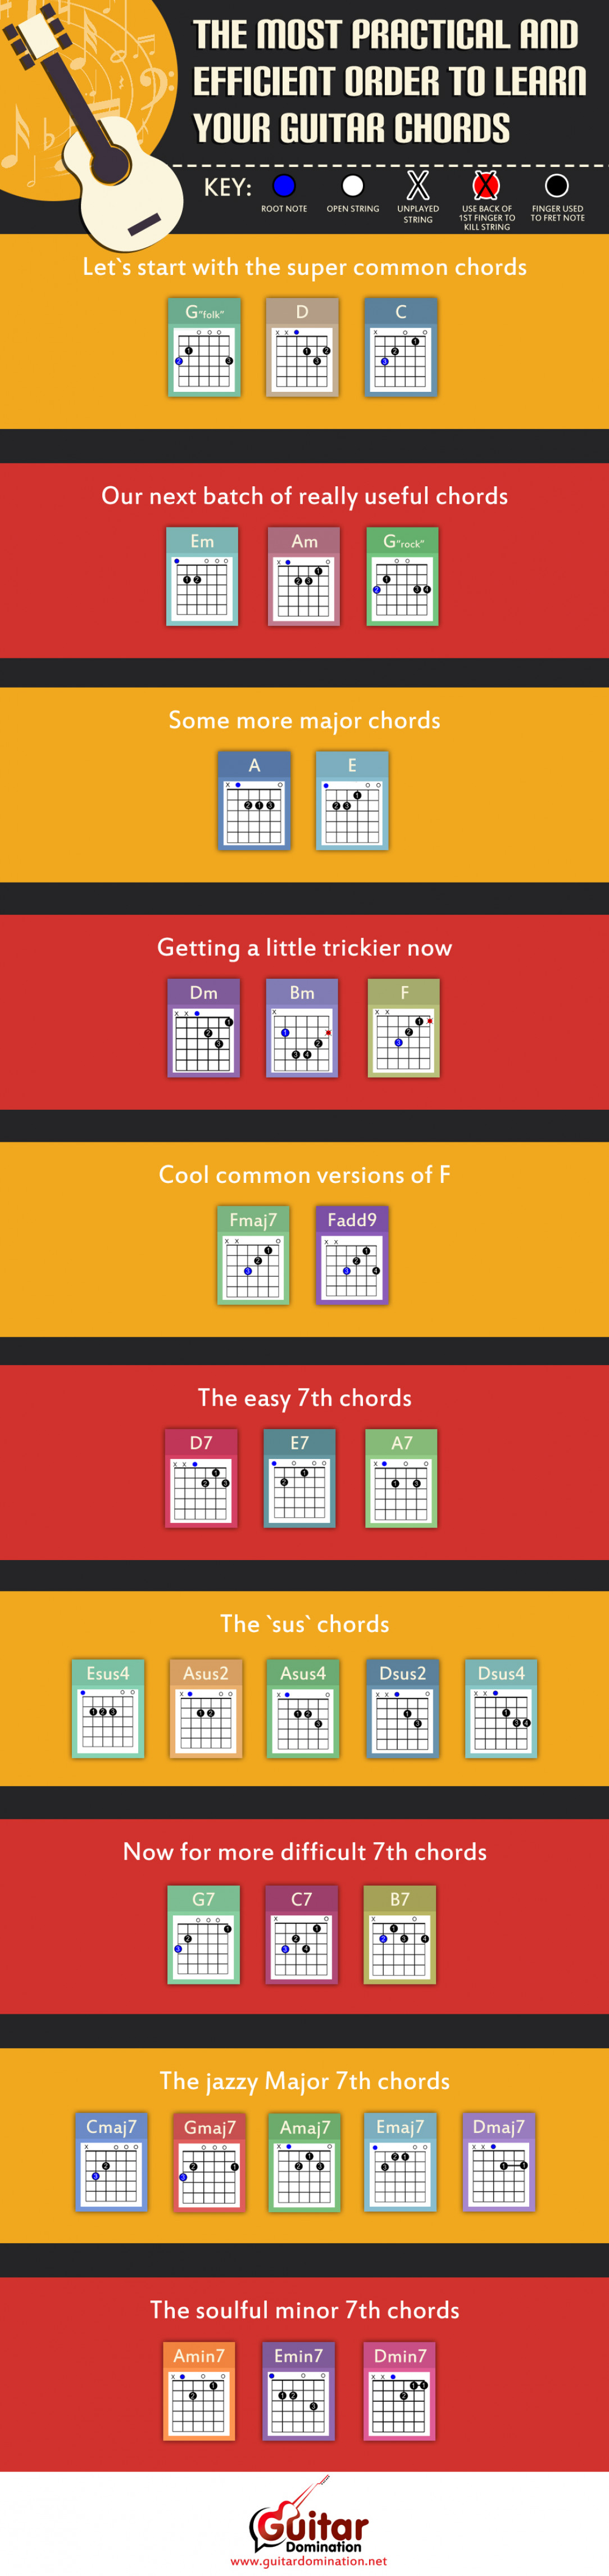 The most practical and efficient order to learn guitar chords